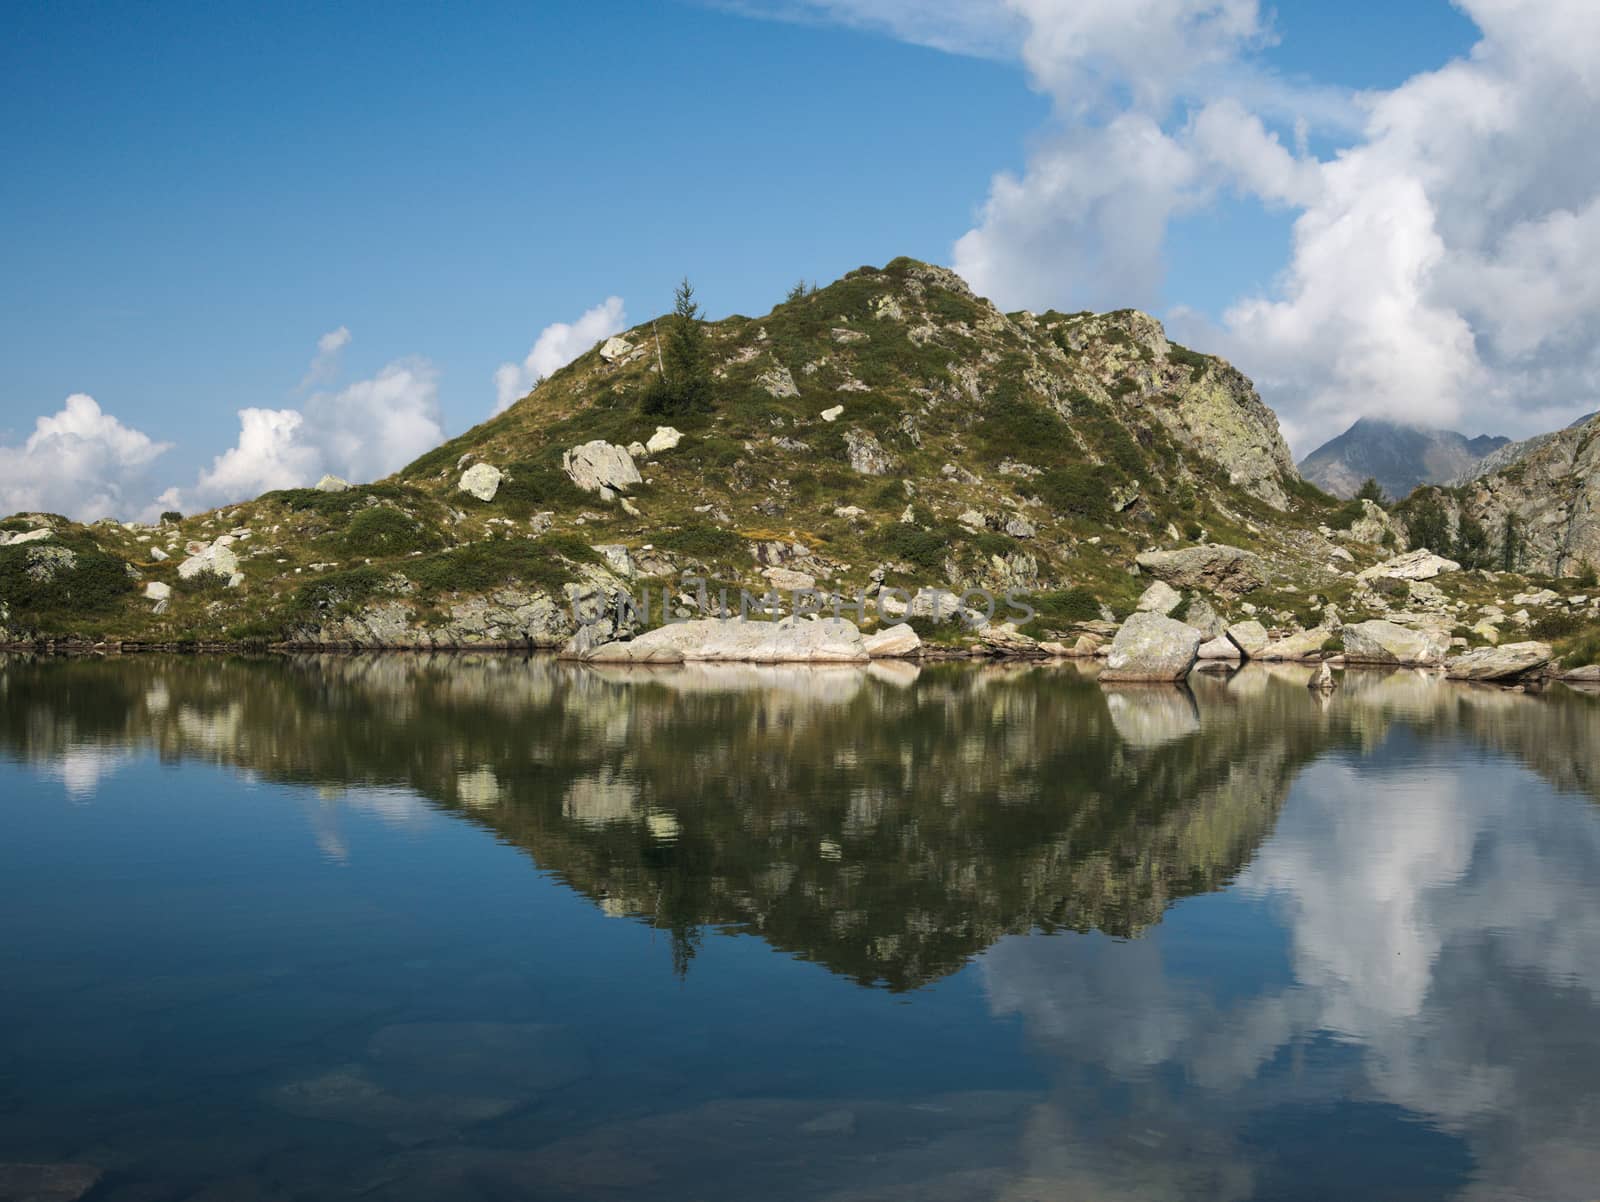 Mountains reflect on small alpine lake on the Bergamo Alps
 by gigidread